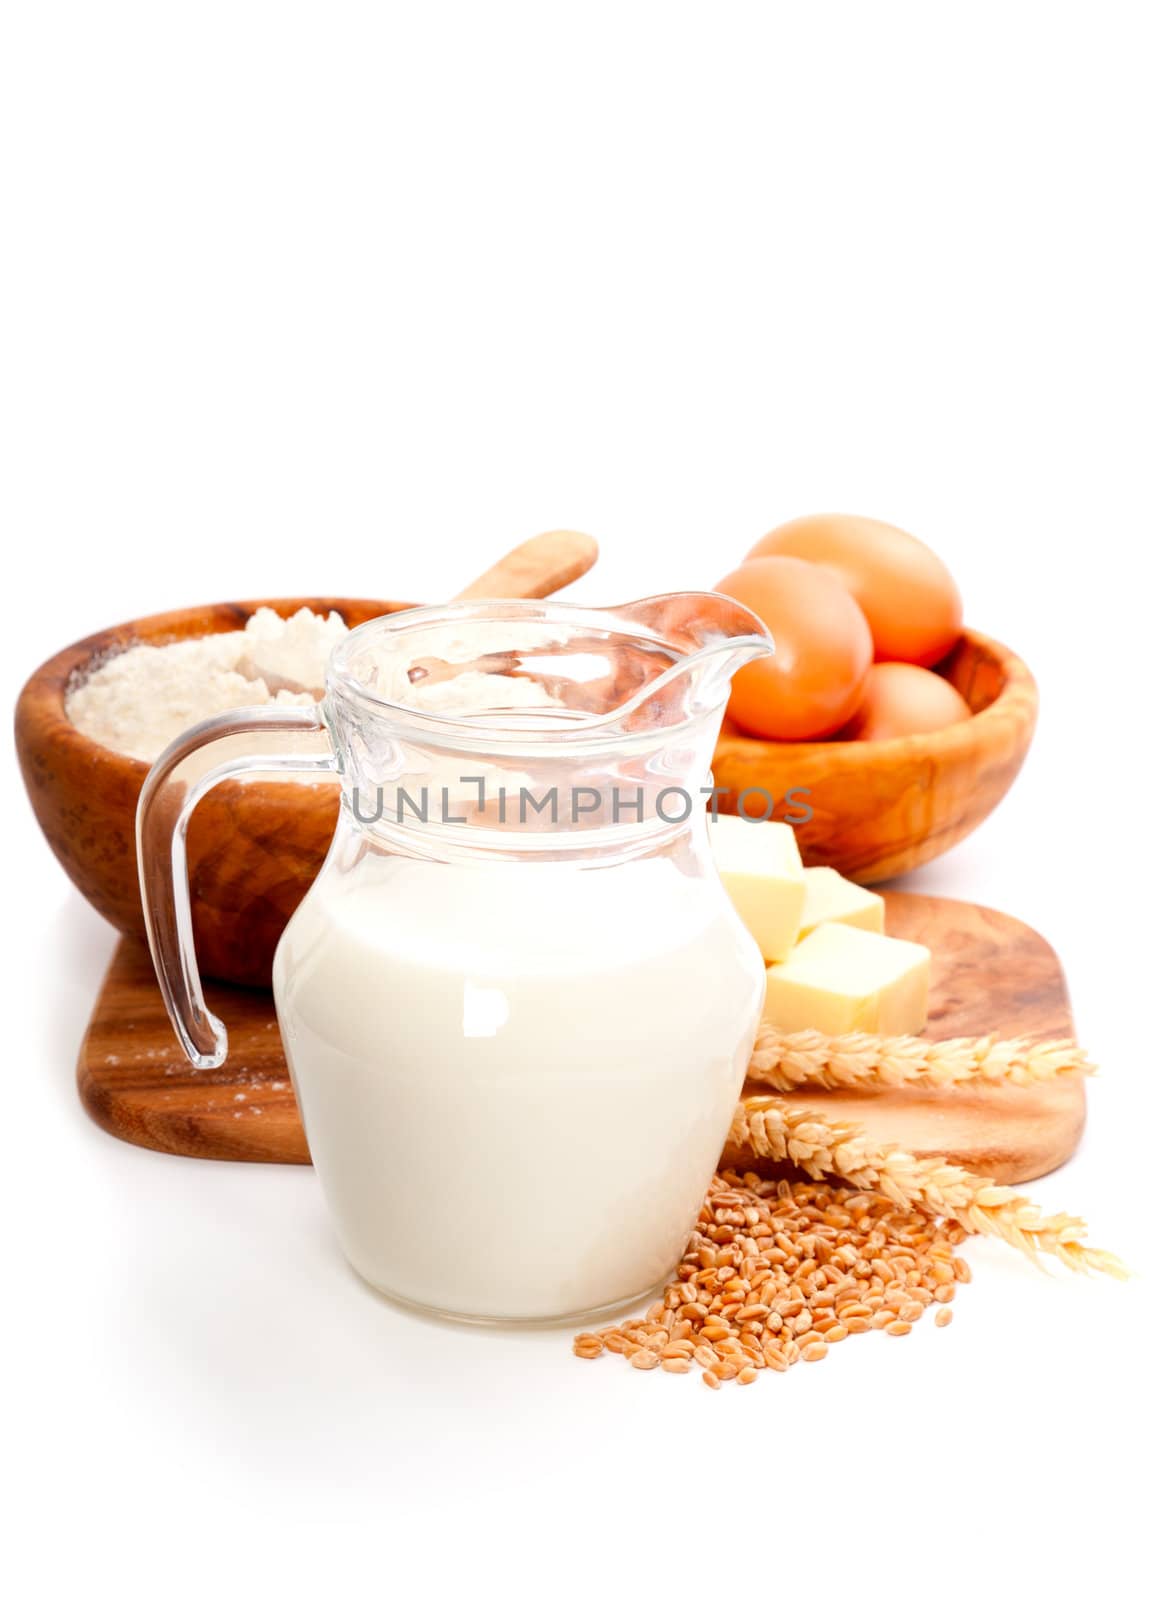 Milk Pitcher isolated with ingredients for baking, isolated on a white background